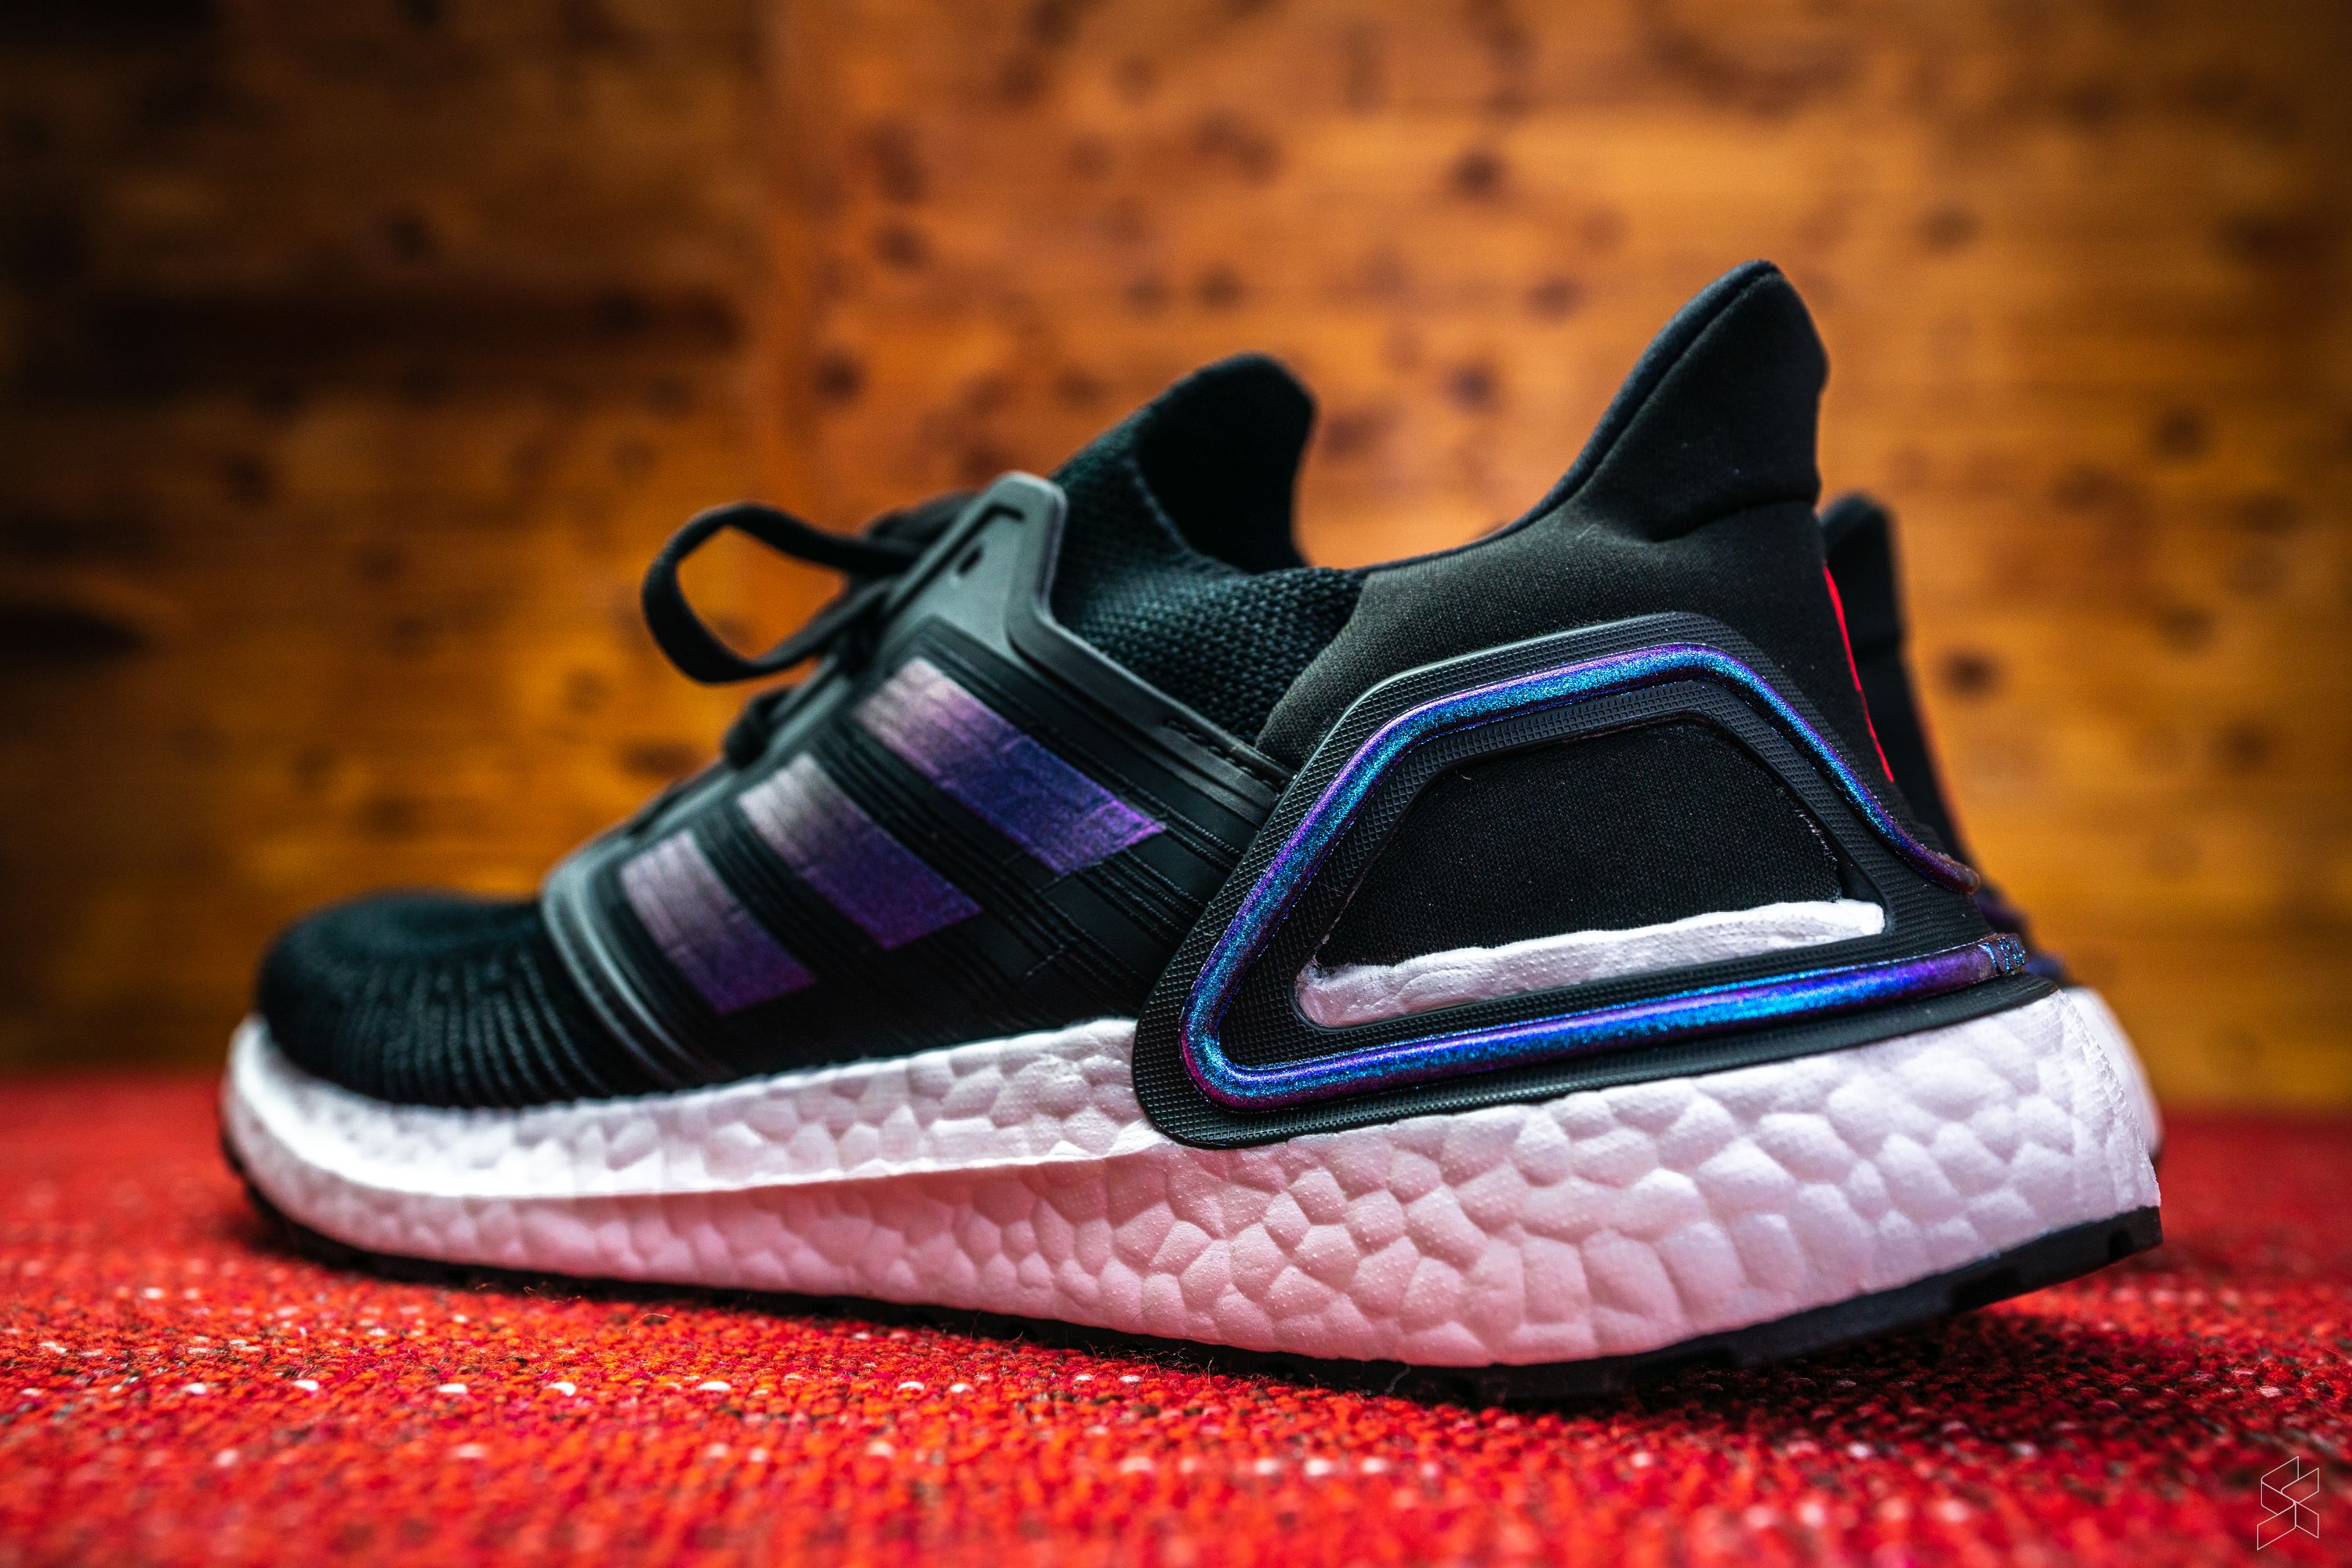 Adidas Ultraboost 20 Are good enough to help this unfit writer finish a race? - SoyaCincau